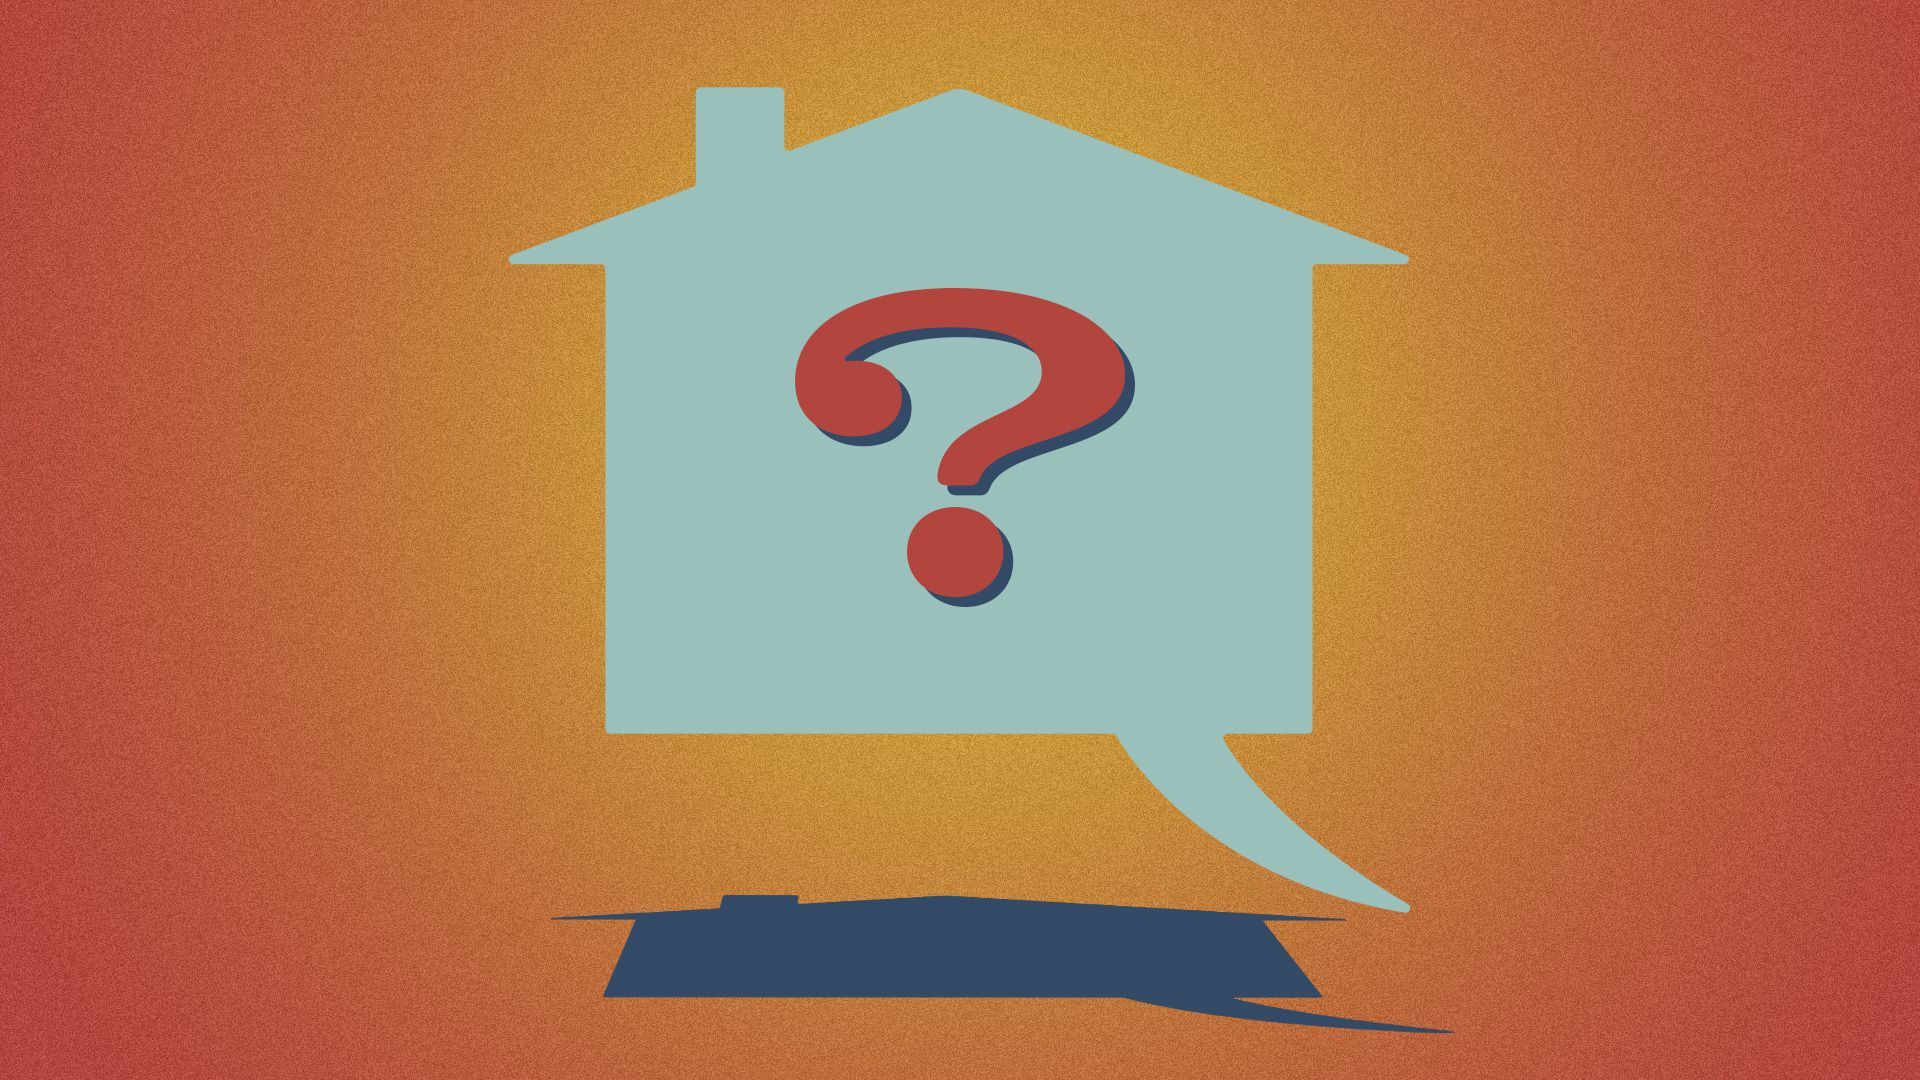 An illustration of a house with a question mark.